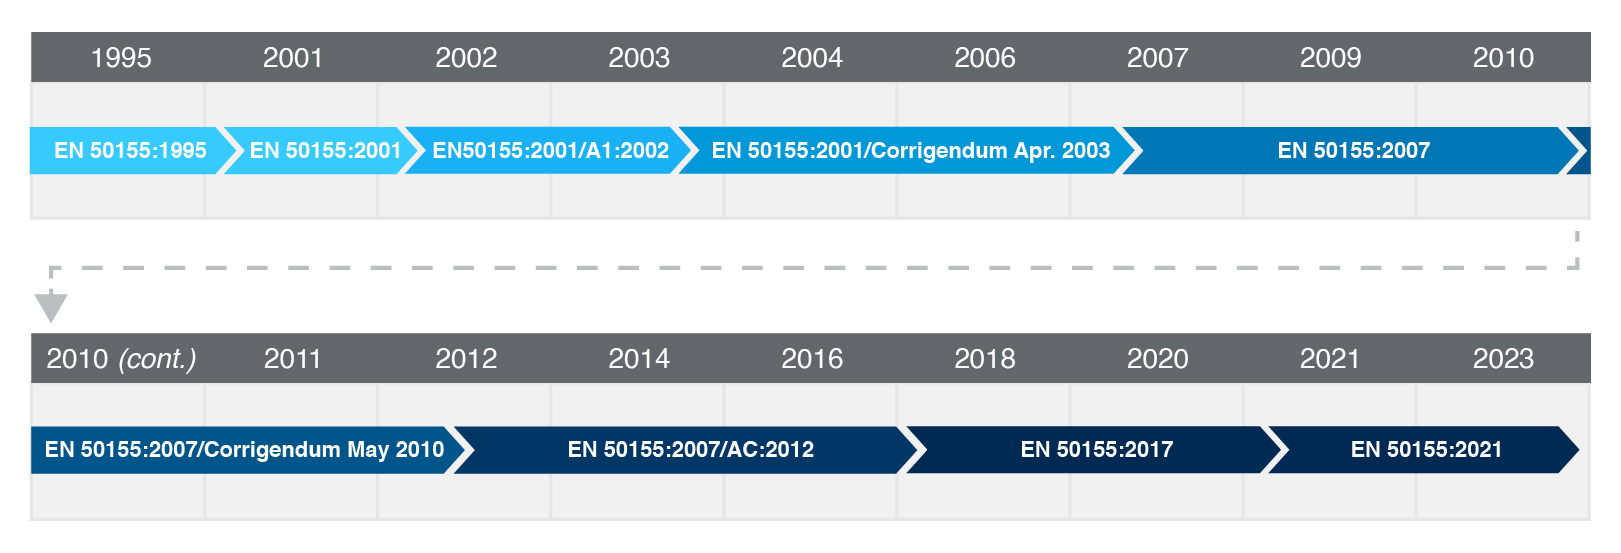 Timeline of updates and revisions to EN 50155.